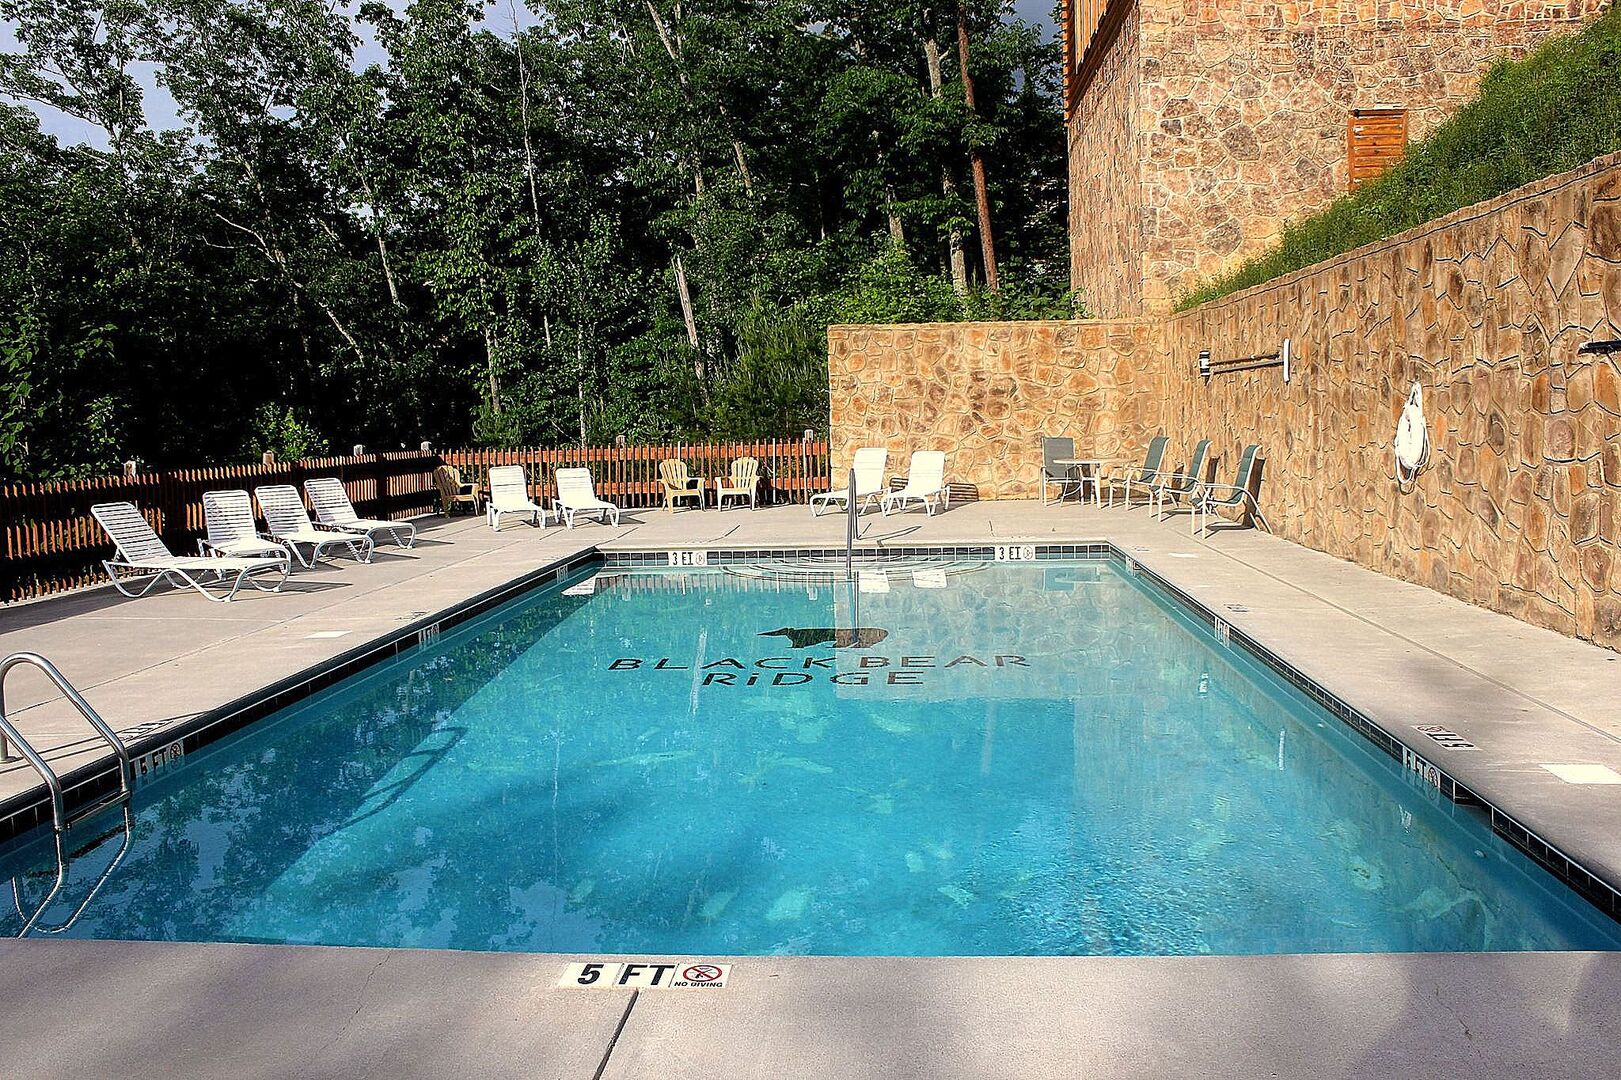 RESORT POOL ACCESS FOR GUESTS DURING OPEN POOL SEASON APR-SEPT. HEATED DURING COOL MONTHS